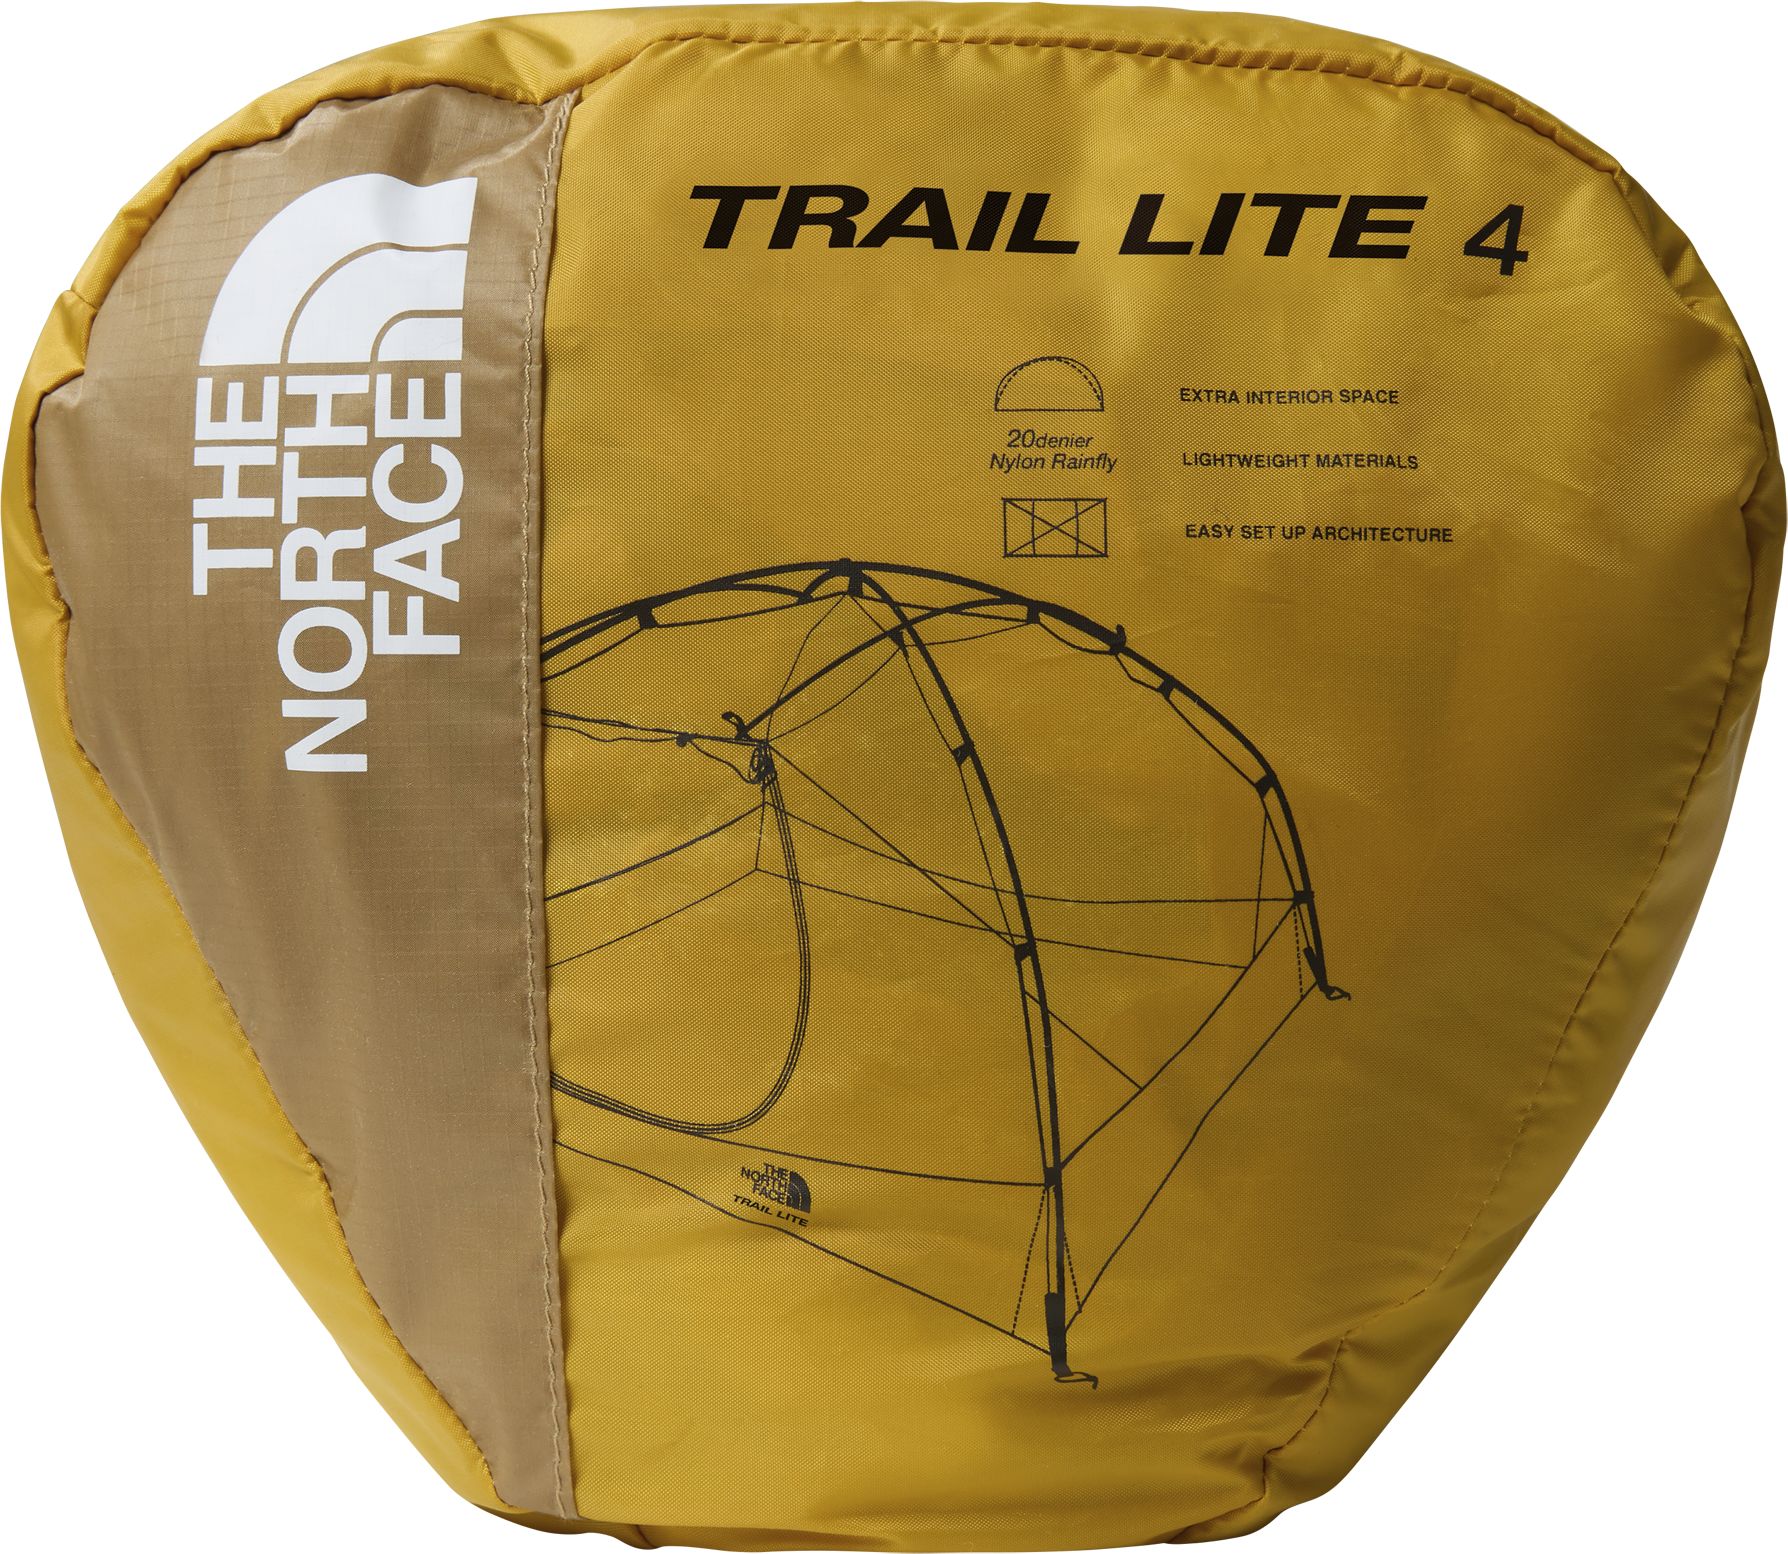 THE NORTH FACE, TRAIL LITE 4